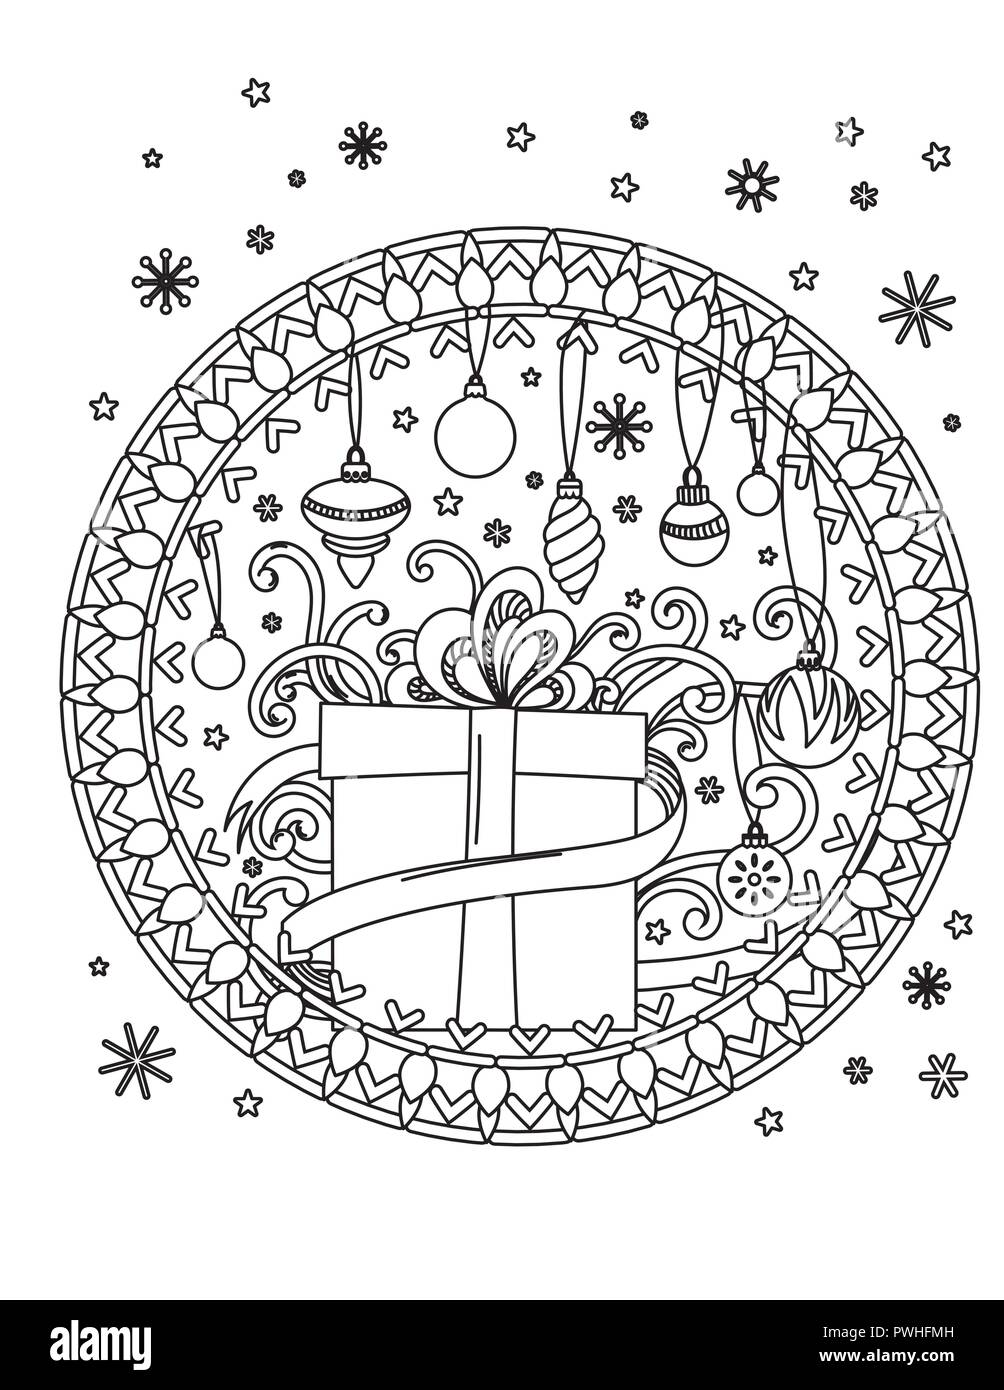 Coloring Books For Adults Christmas Mandalas Pdf Free Download